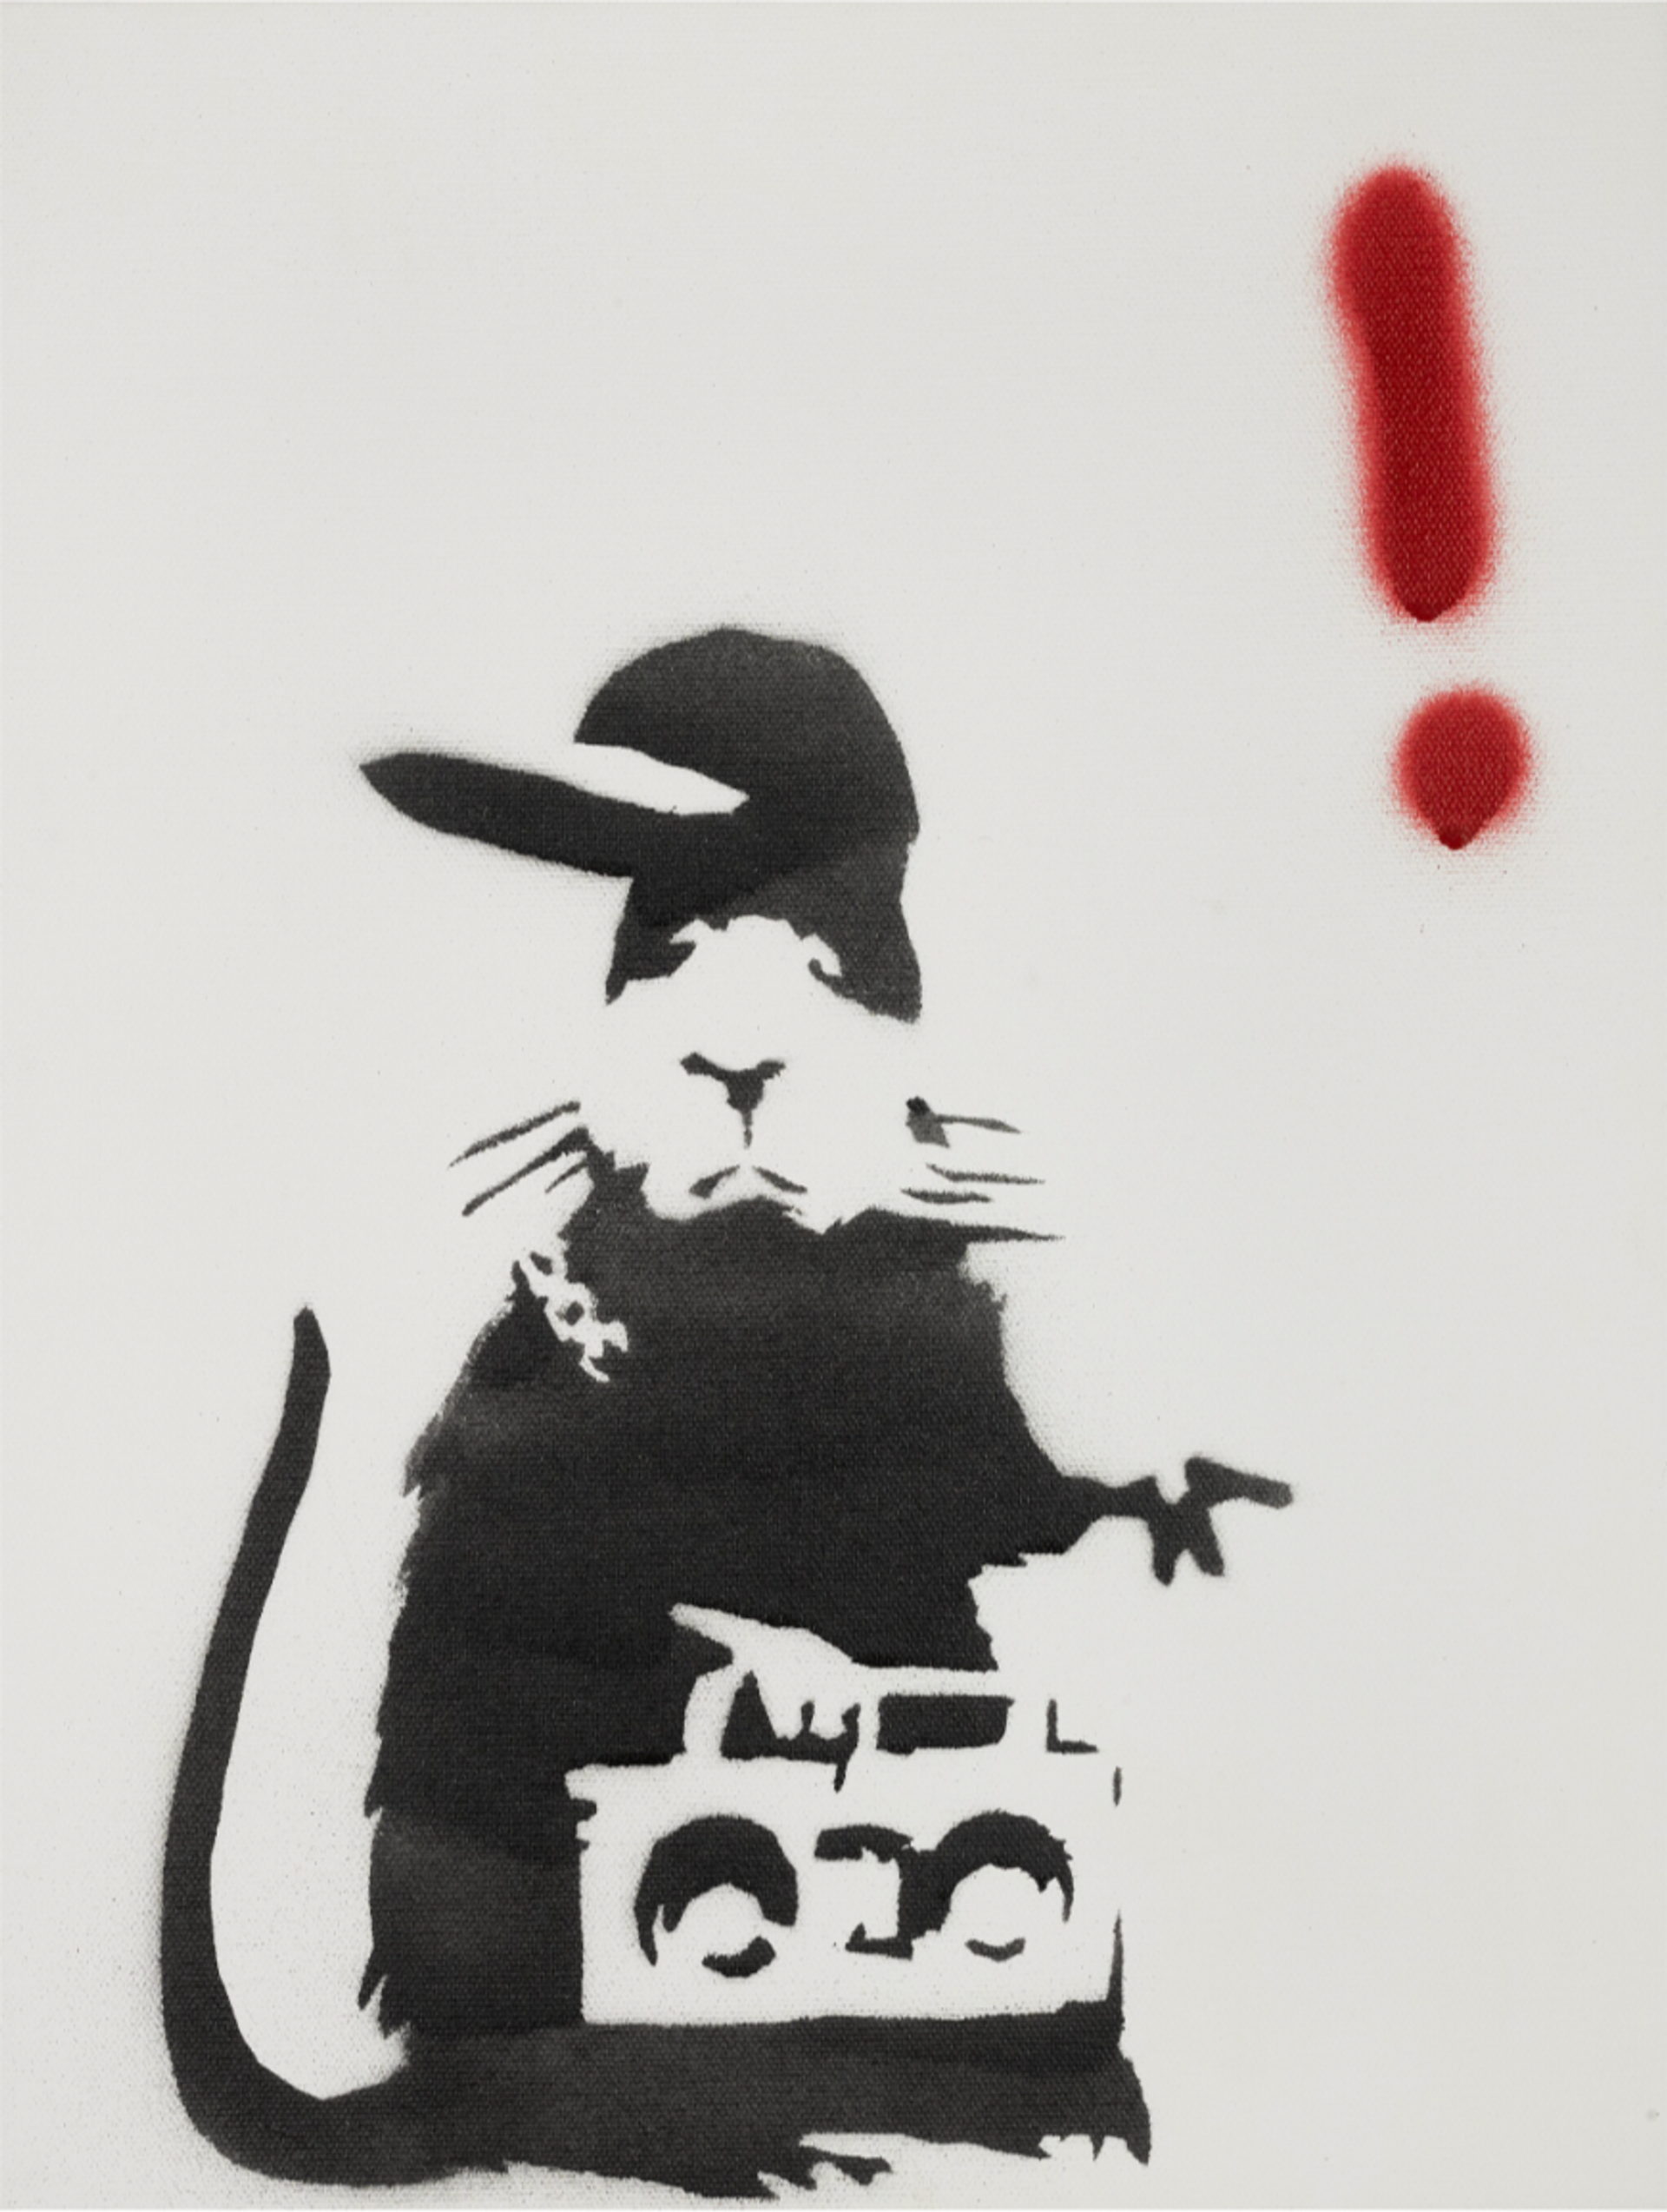 A black spray painted rat dressed in a cap and chain, holding a boombox. In the top right corner of the composition is a haphazardly spray painted exclamation mark in red.